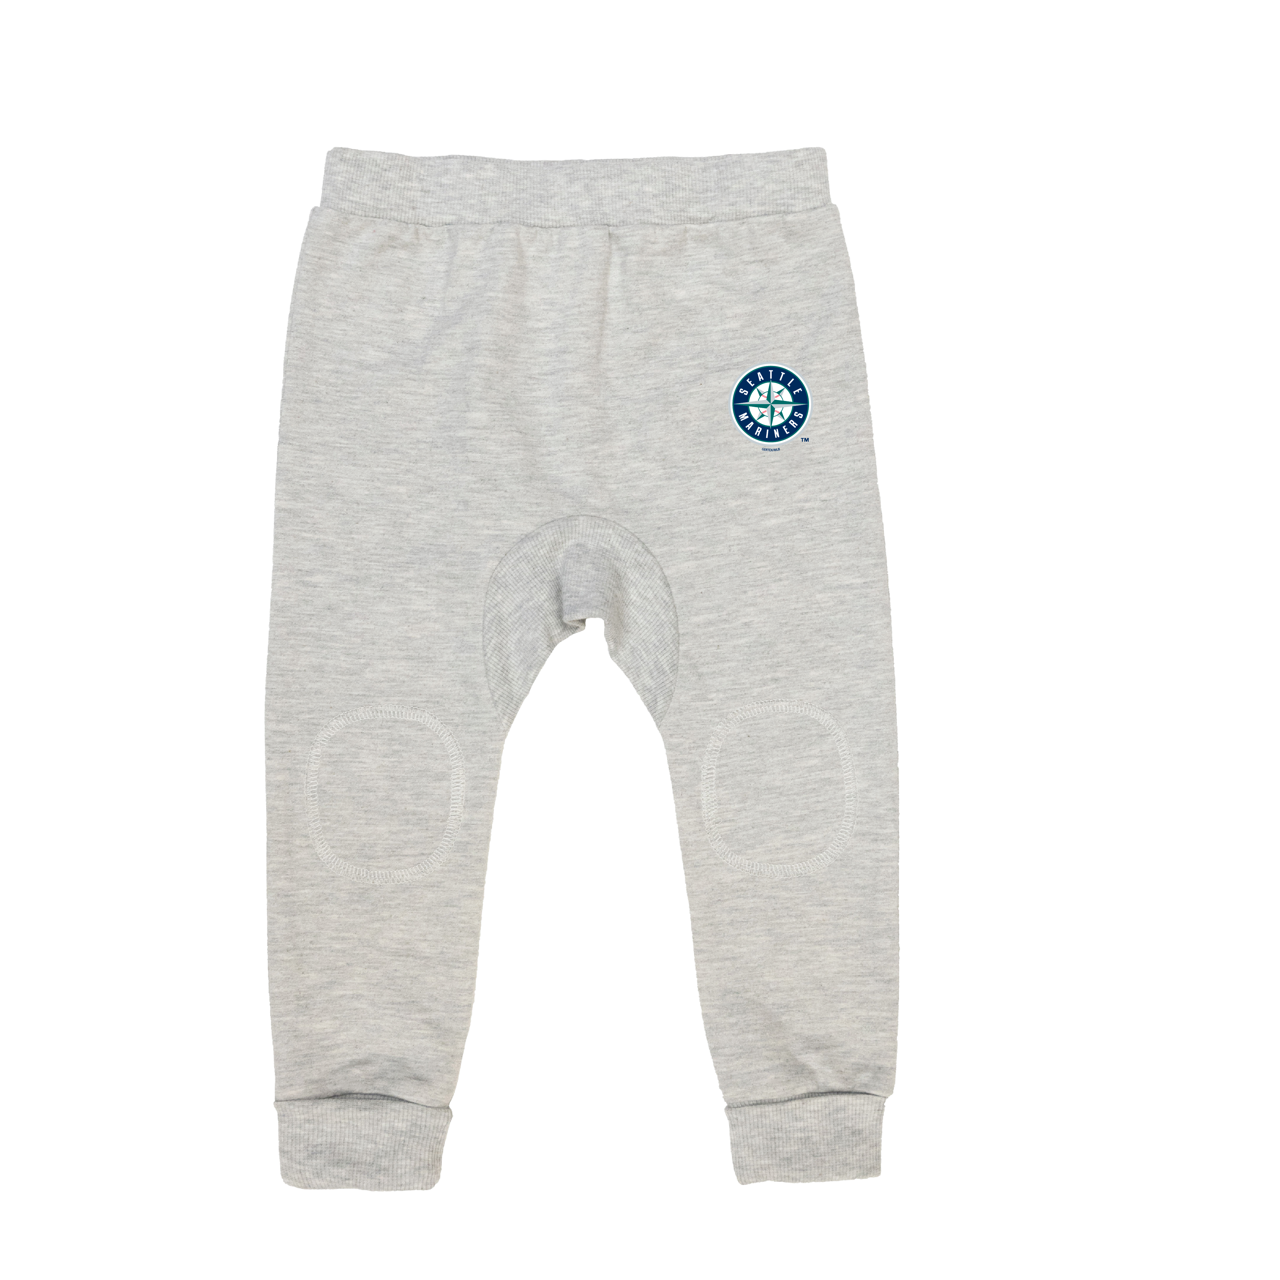 Gertex MLB Unisex Baby French Terry Cotton Track Pants